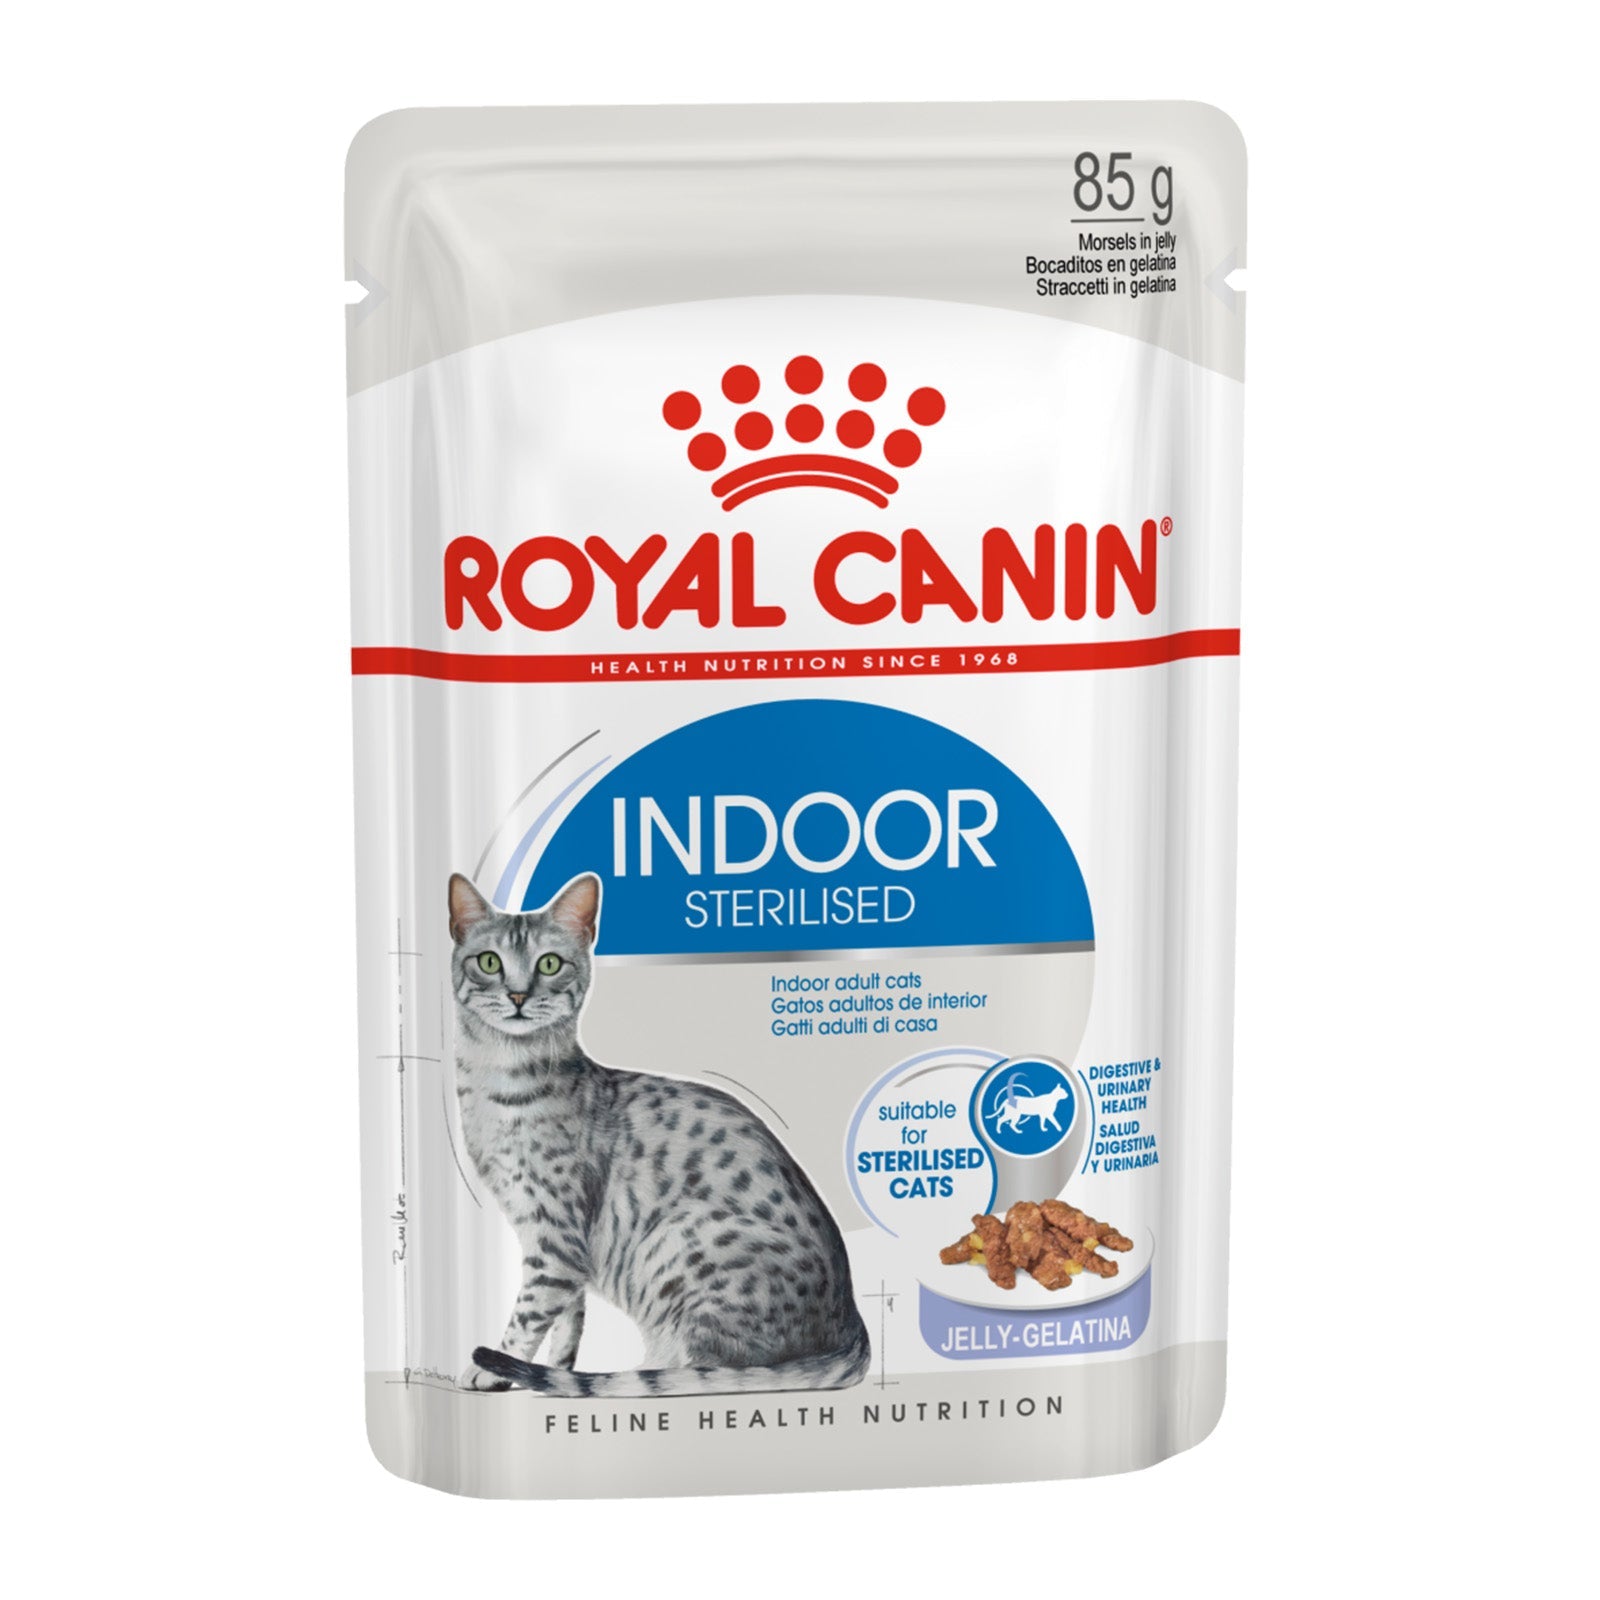 Royal Canin Cat Wet Food Pouches Indoor Sterilised Jelly 12x85g - Woonona Petfood & Produce